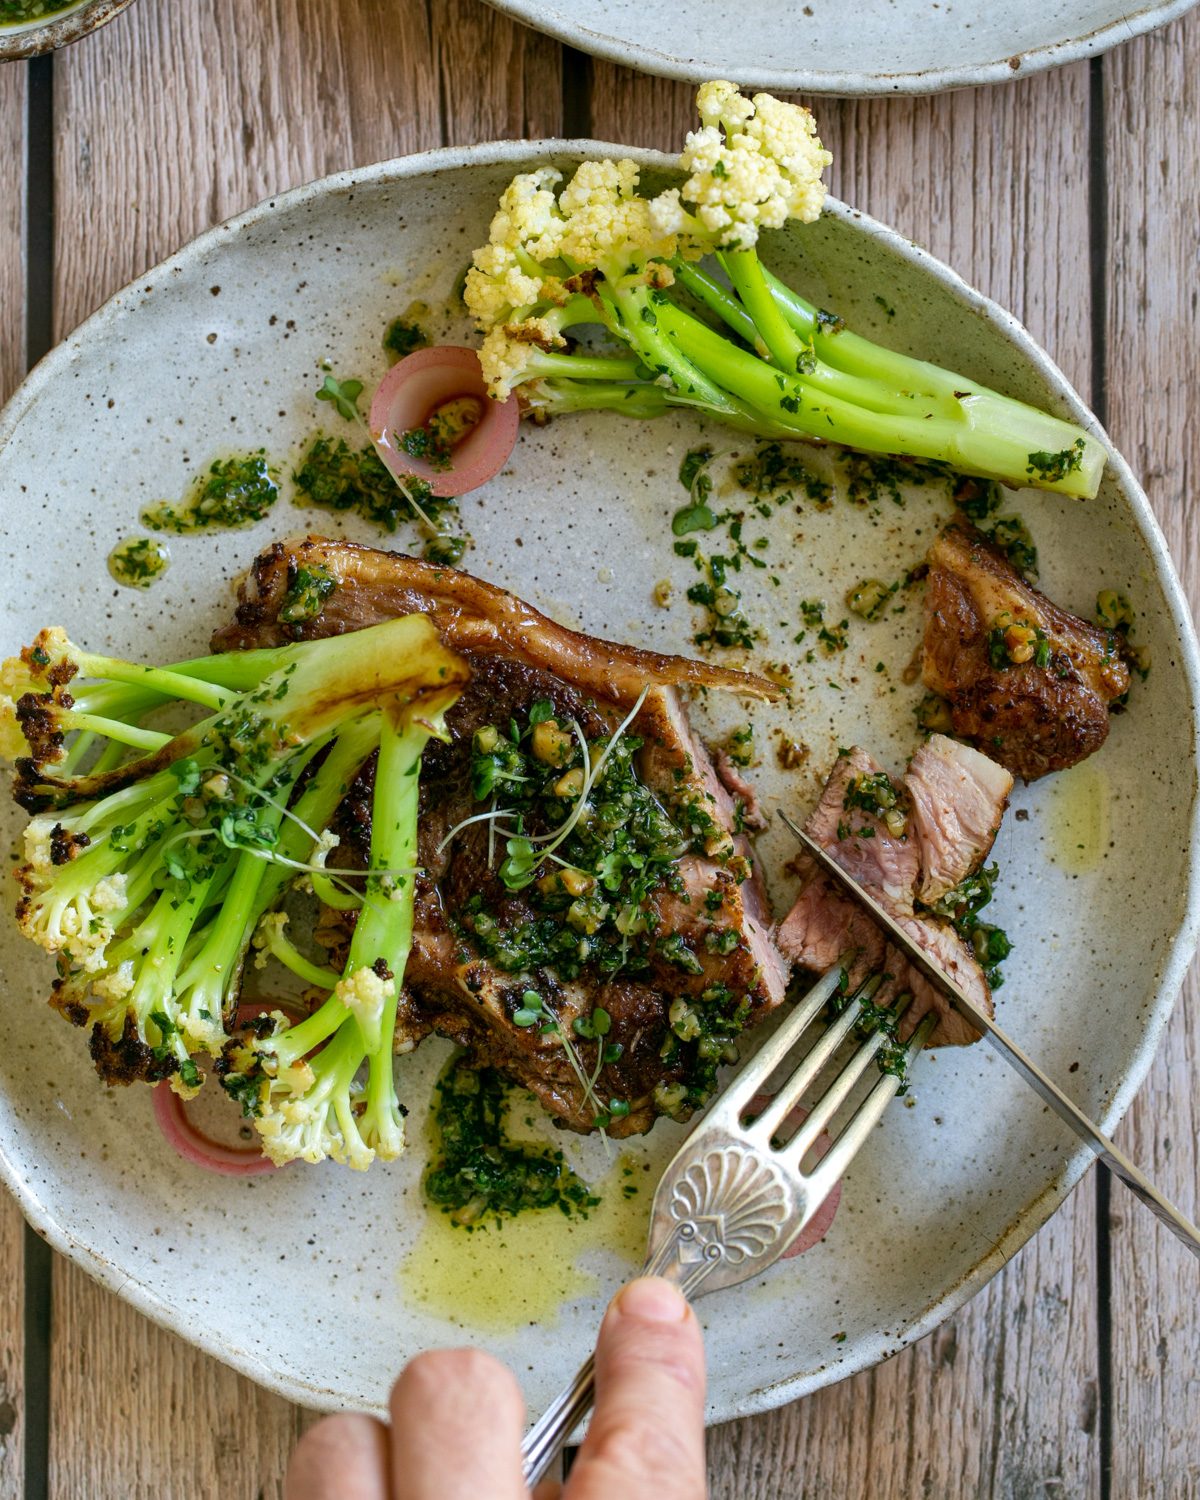 Eating lamb chops with form and knife